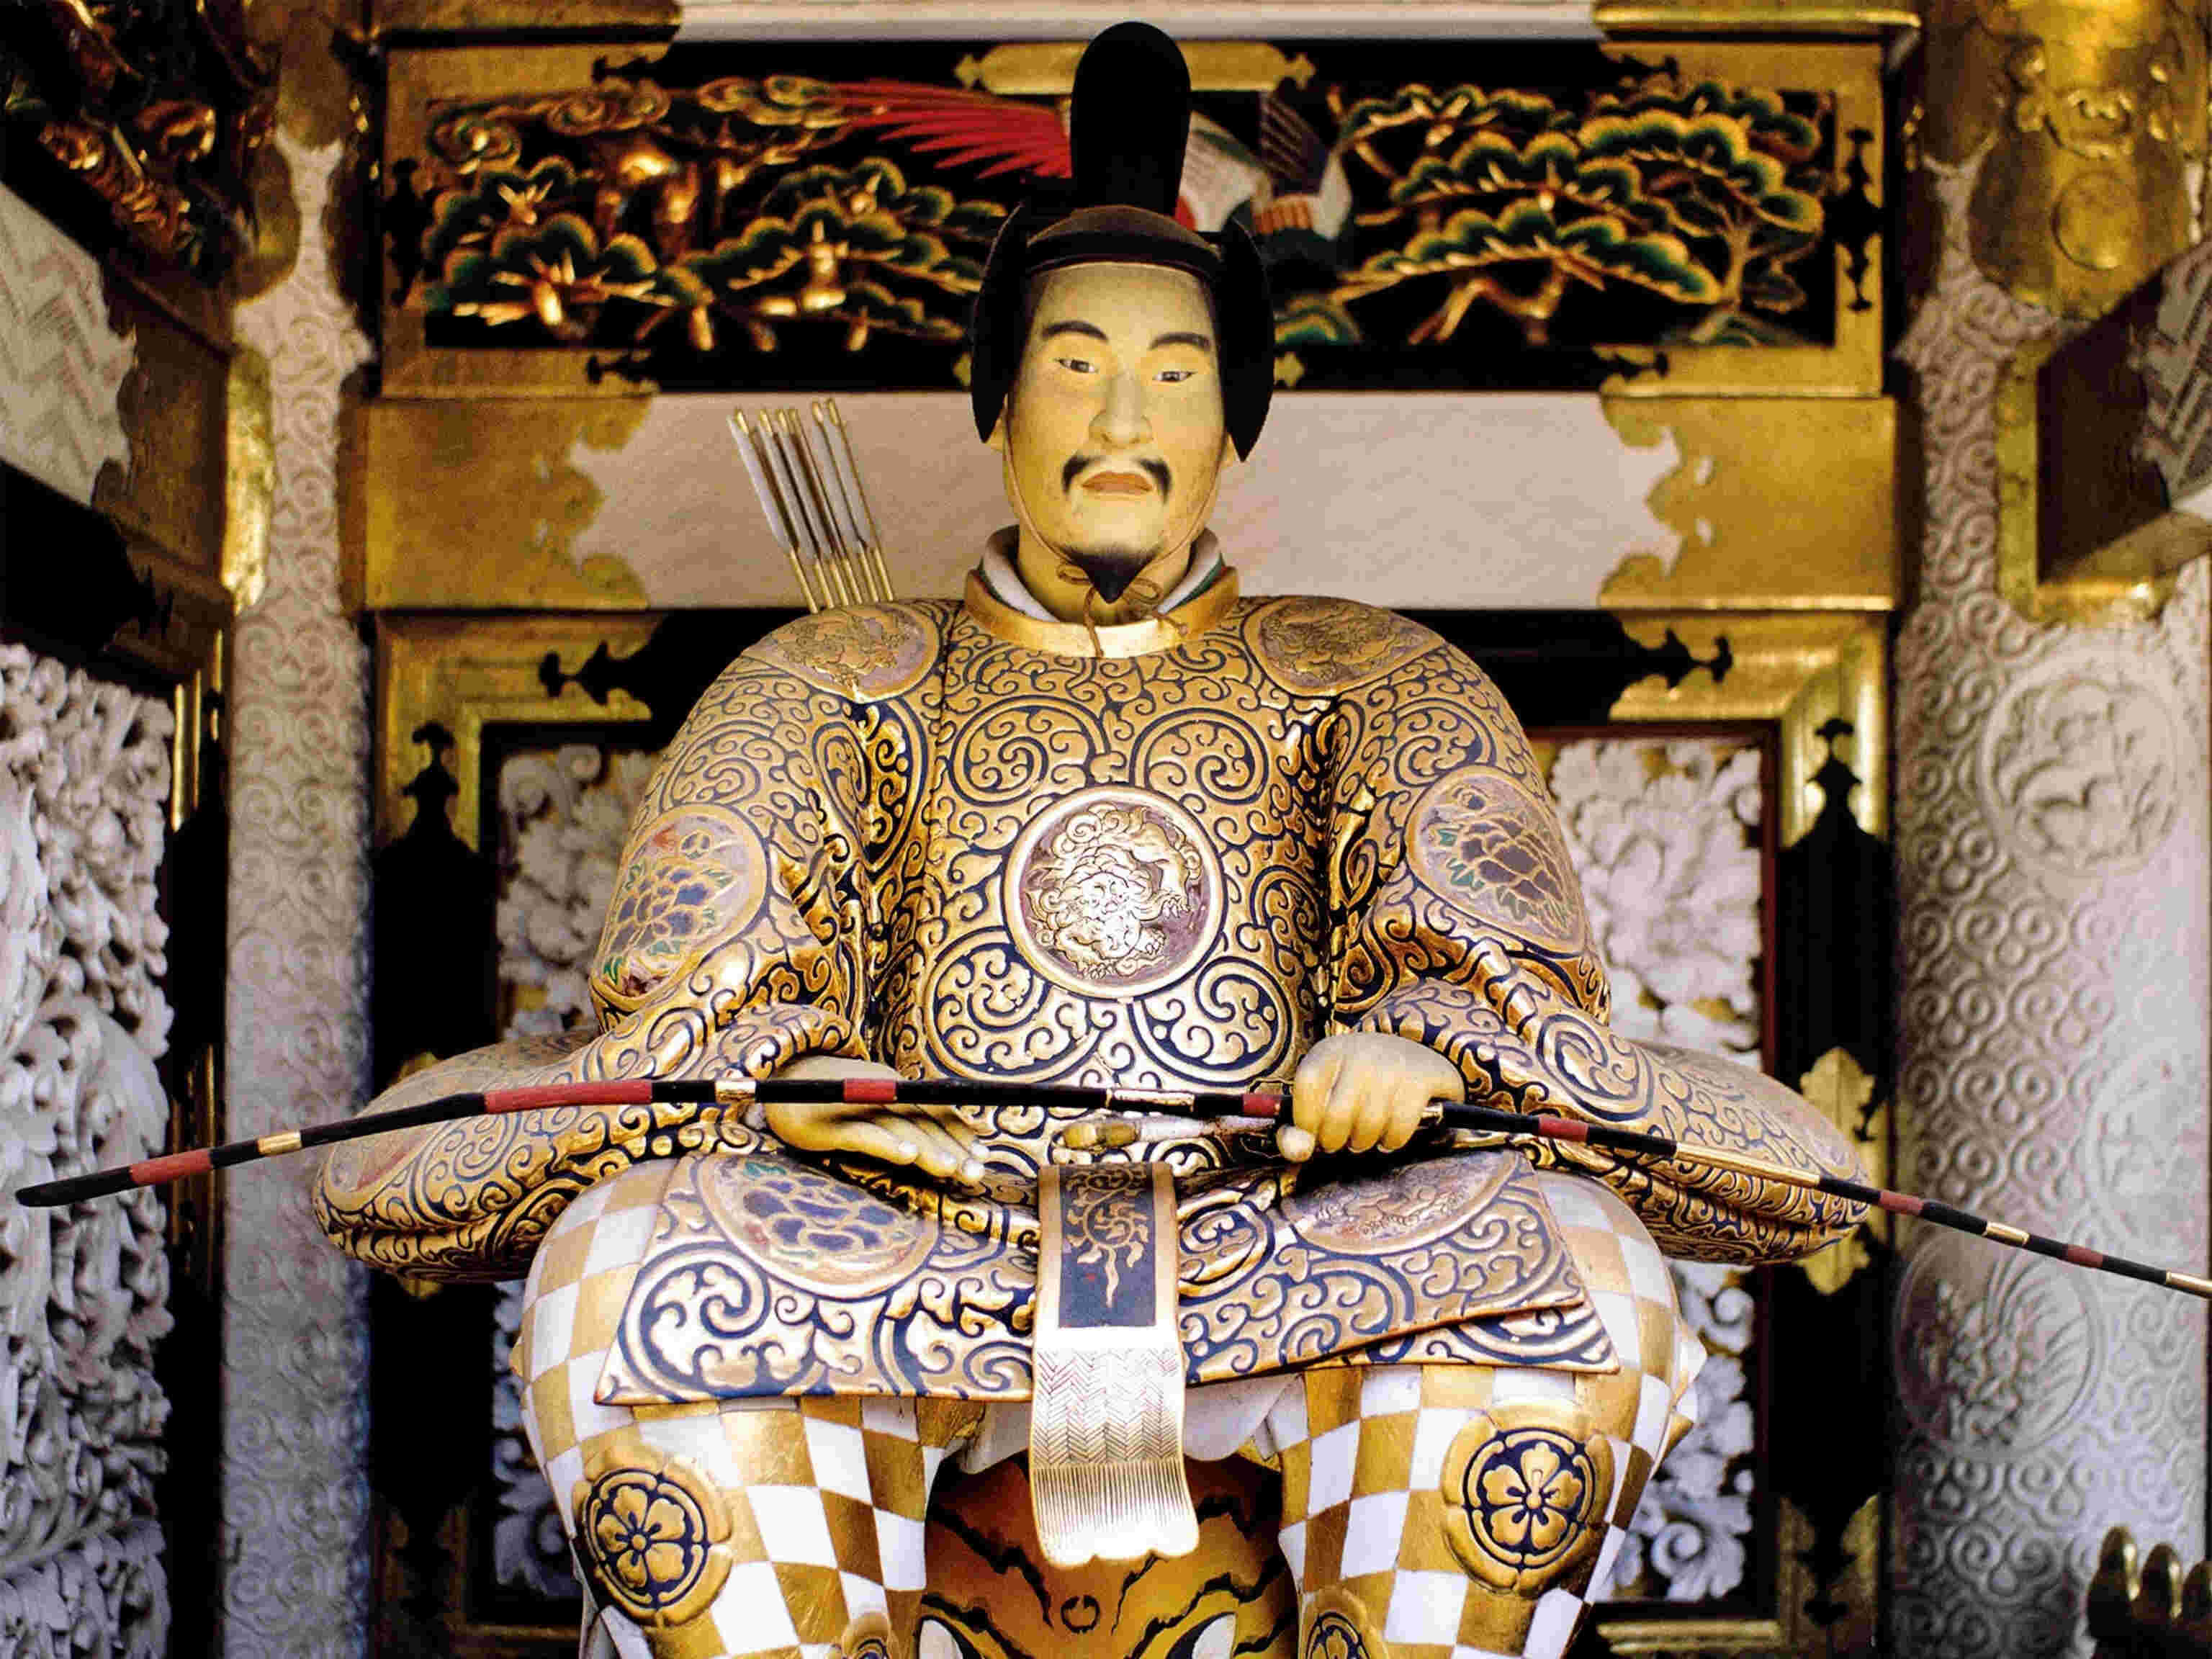 13-fascinating-facts-about-the-emperor-of-the-yayoi-period-statue